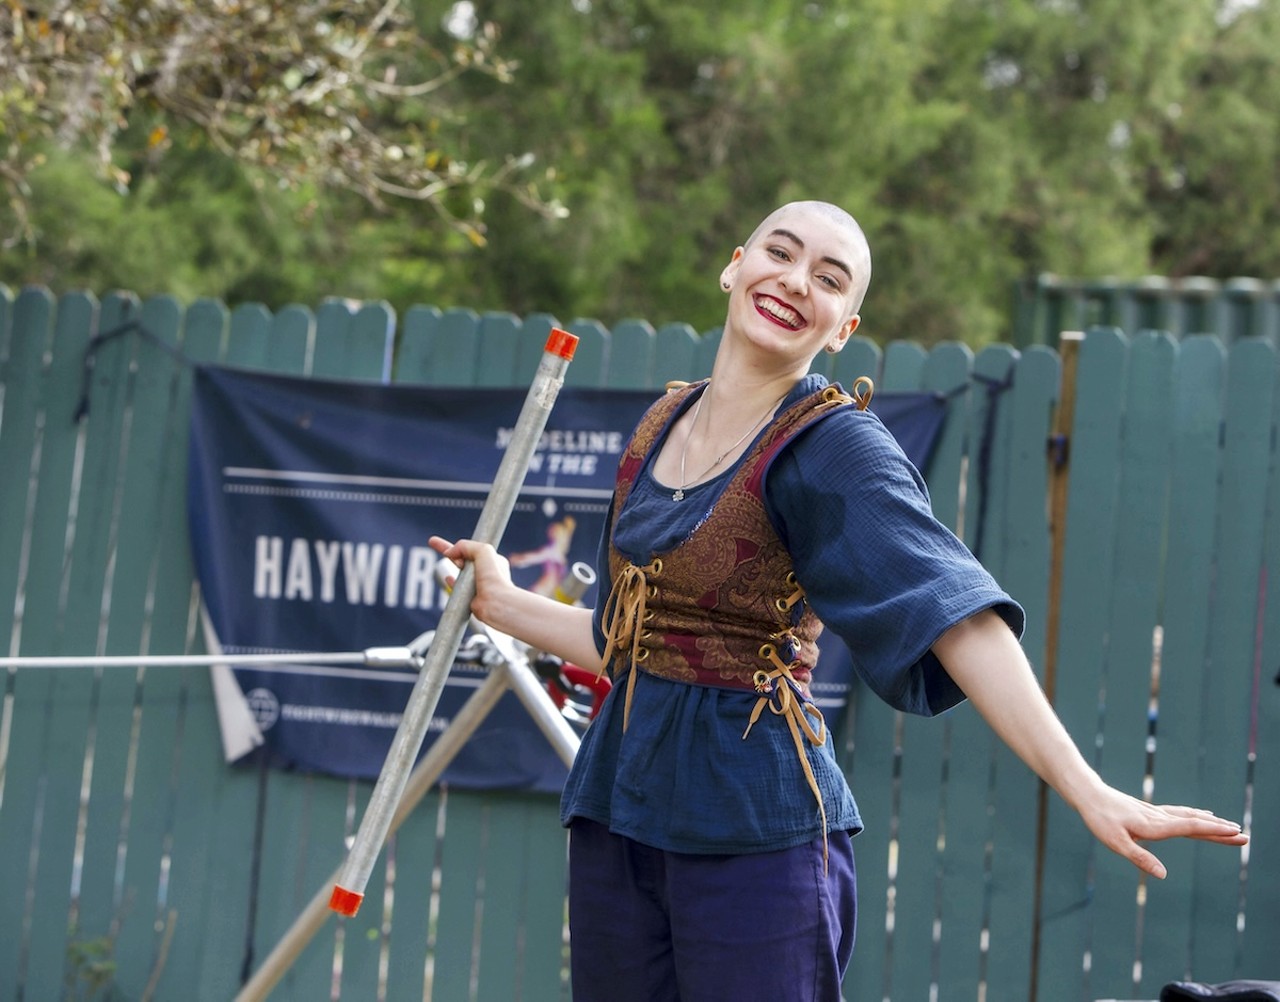 Photos: Tampa Bay’s Renaissance Festival and St. Patrick’s Day collide in Dade City